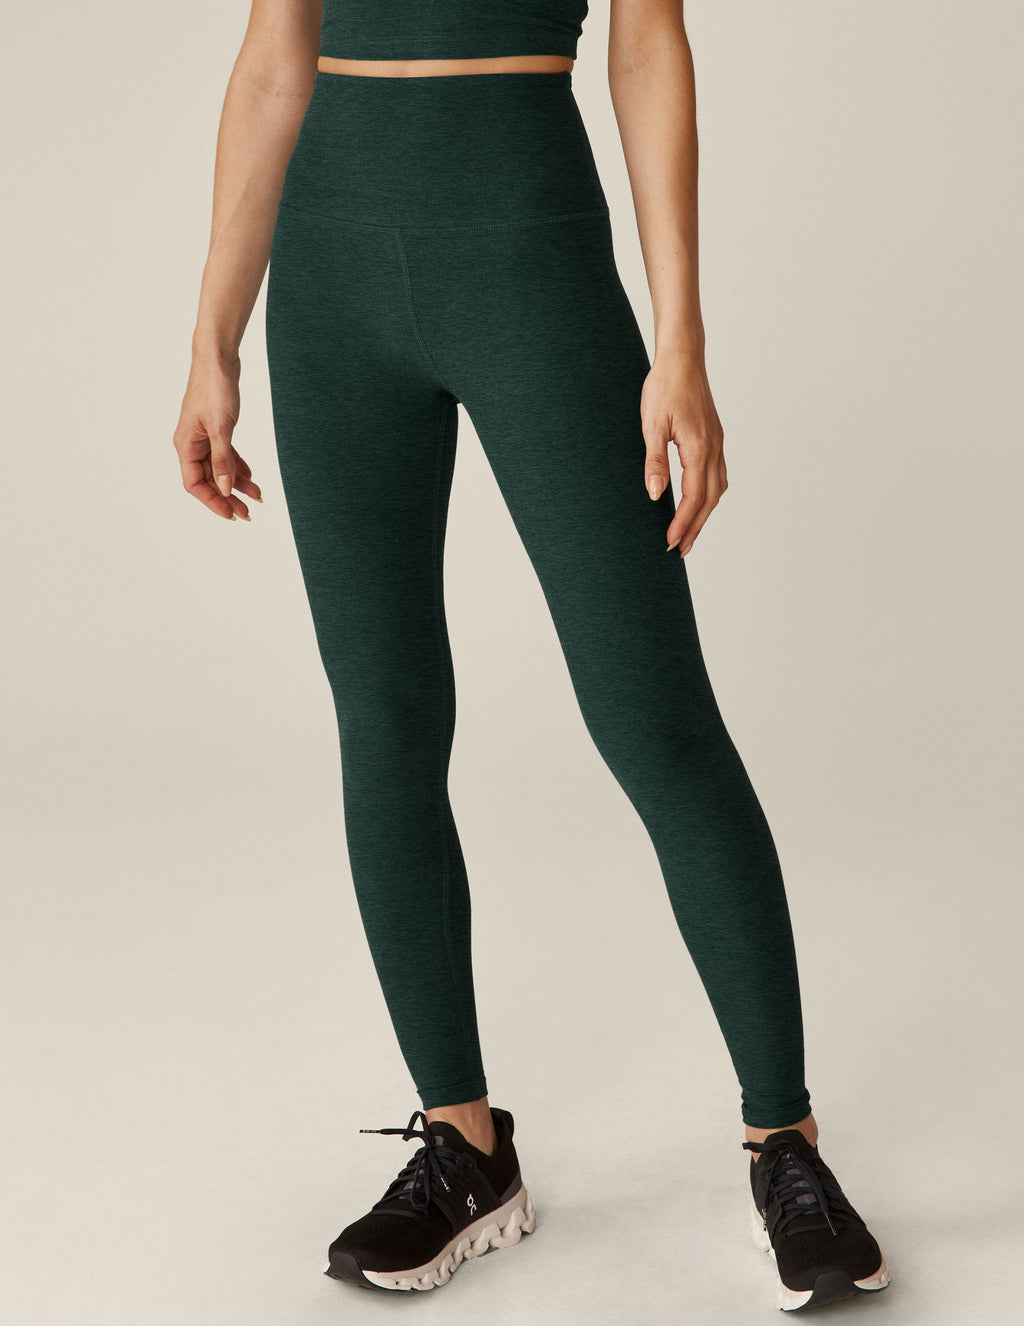 High Waist Push Up Leggings. 30% OFF ALL TYPES LISTED – flawlesstouchfitness